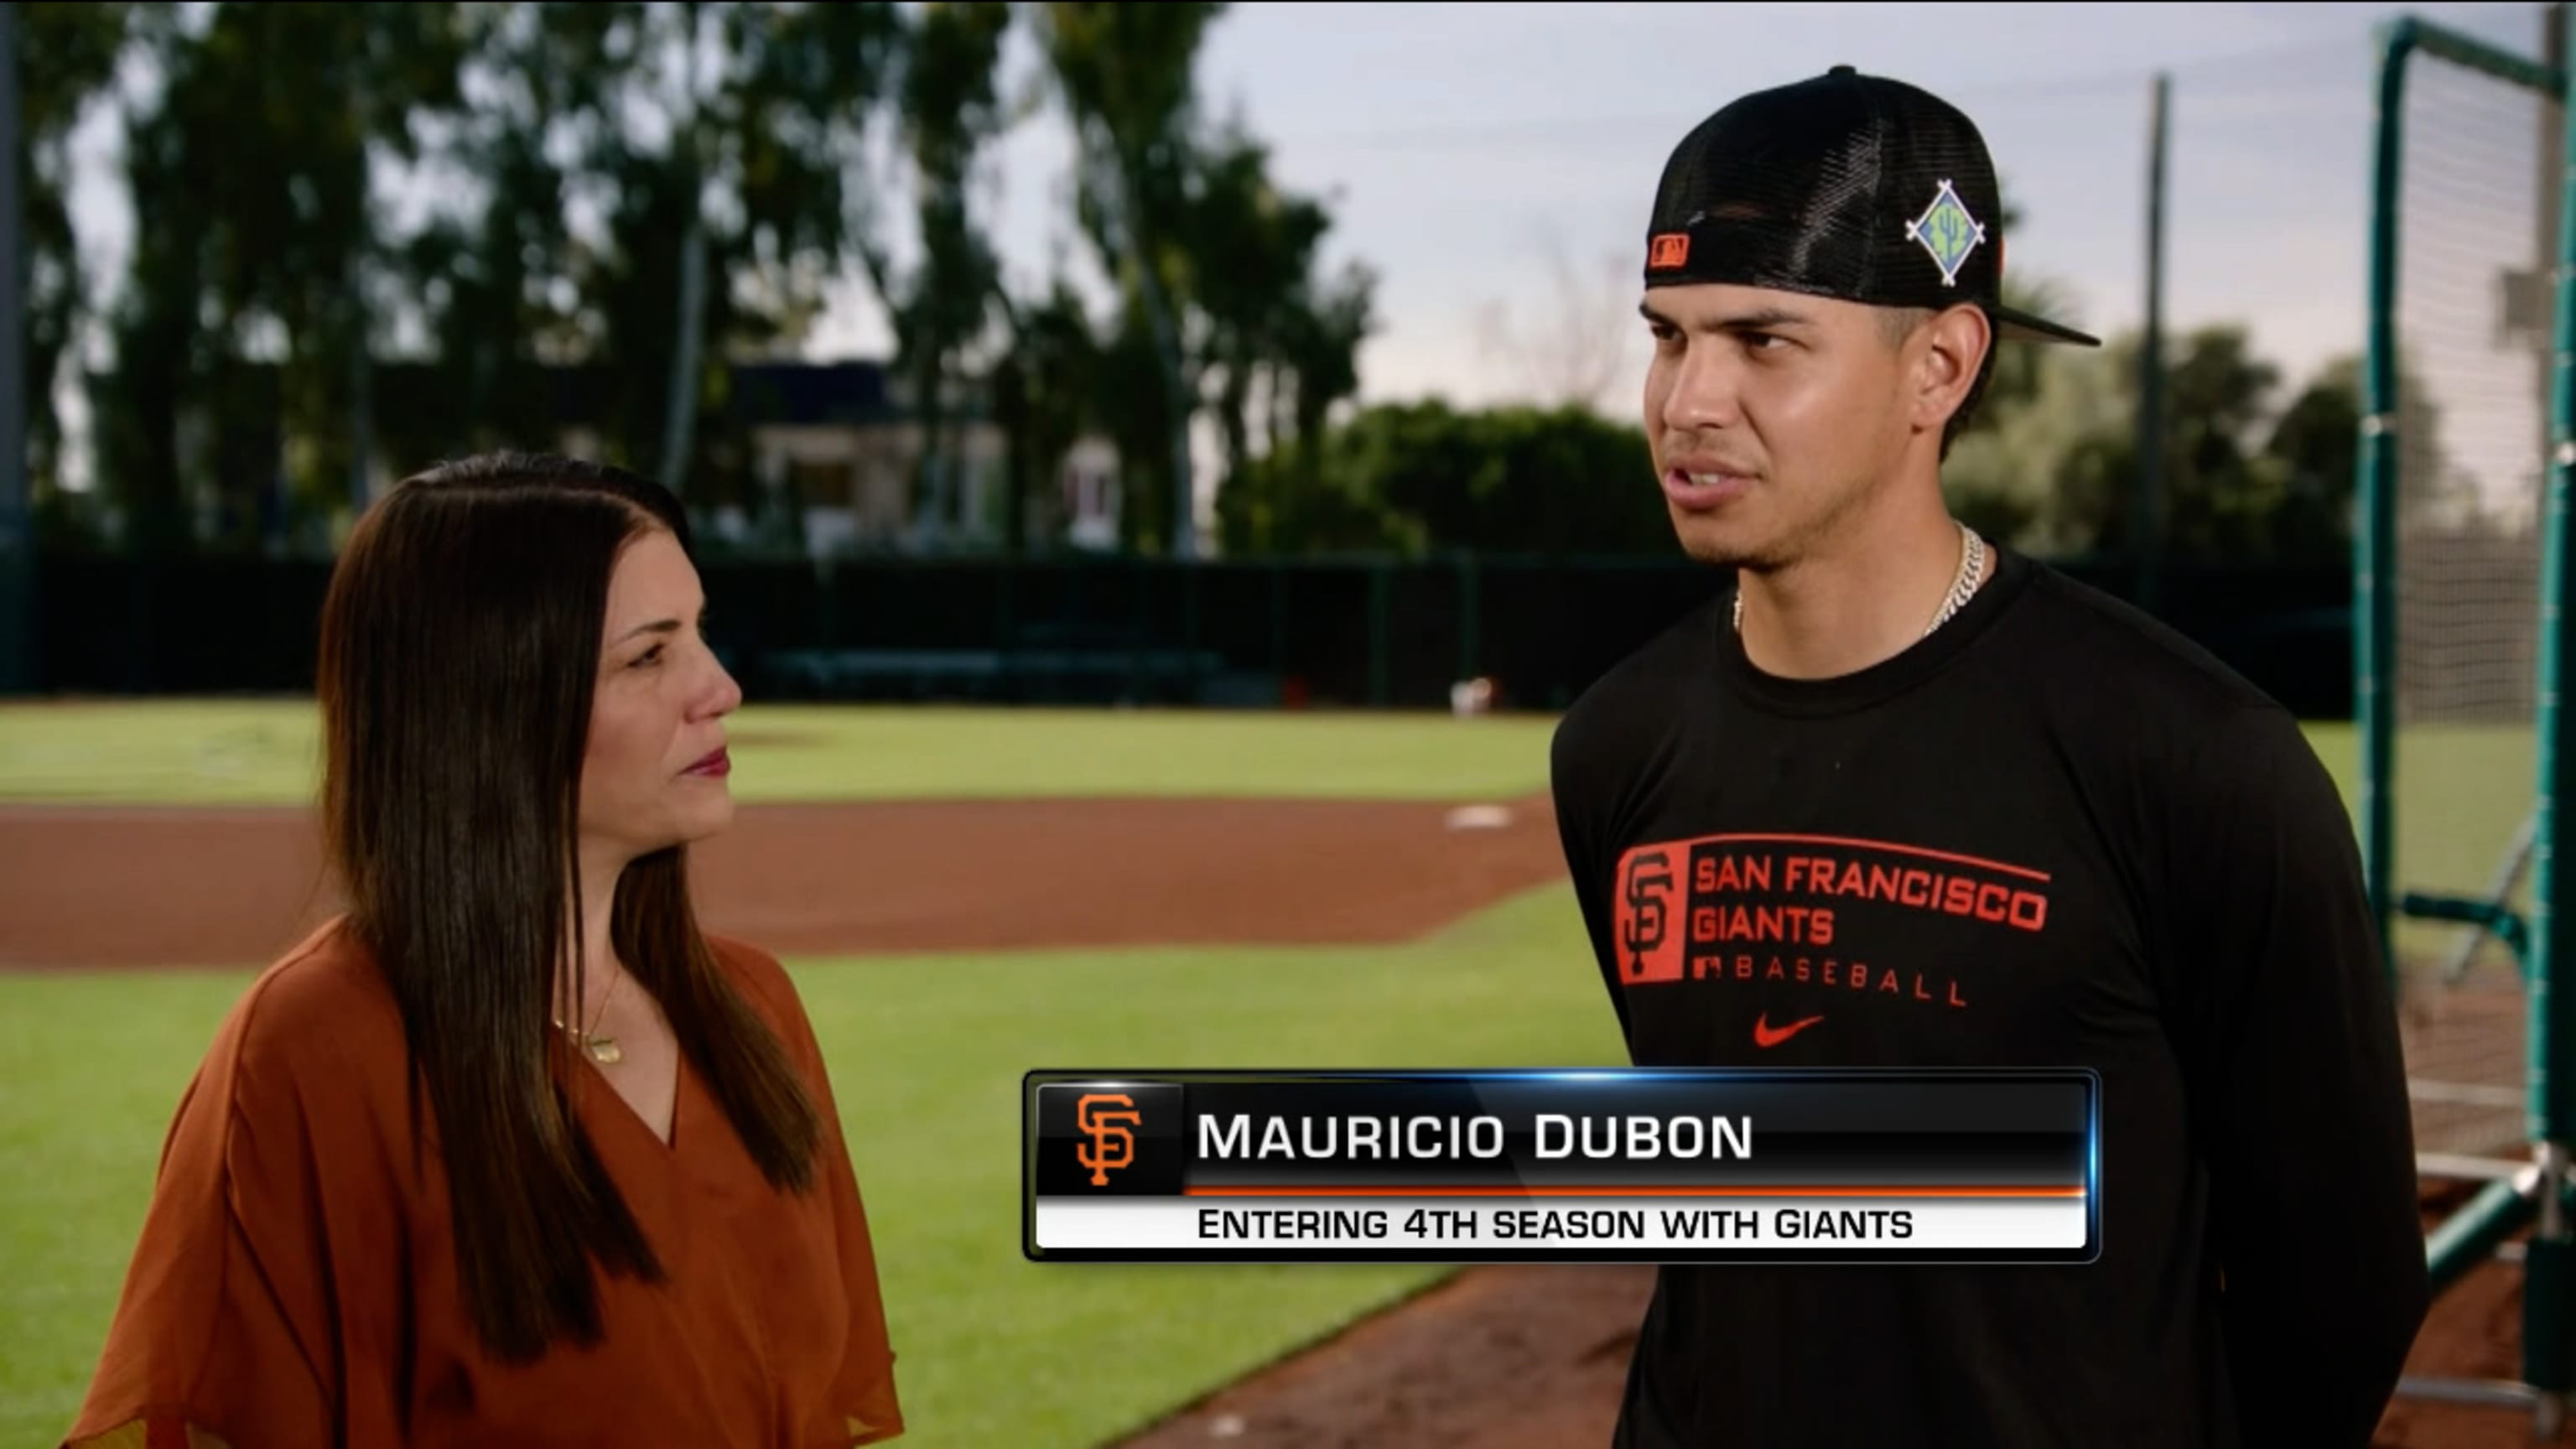 Mauricio Dubon's mother had never seen him play professionally until the  Futures Game